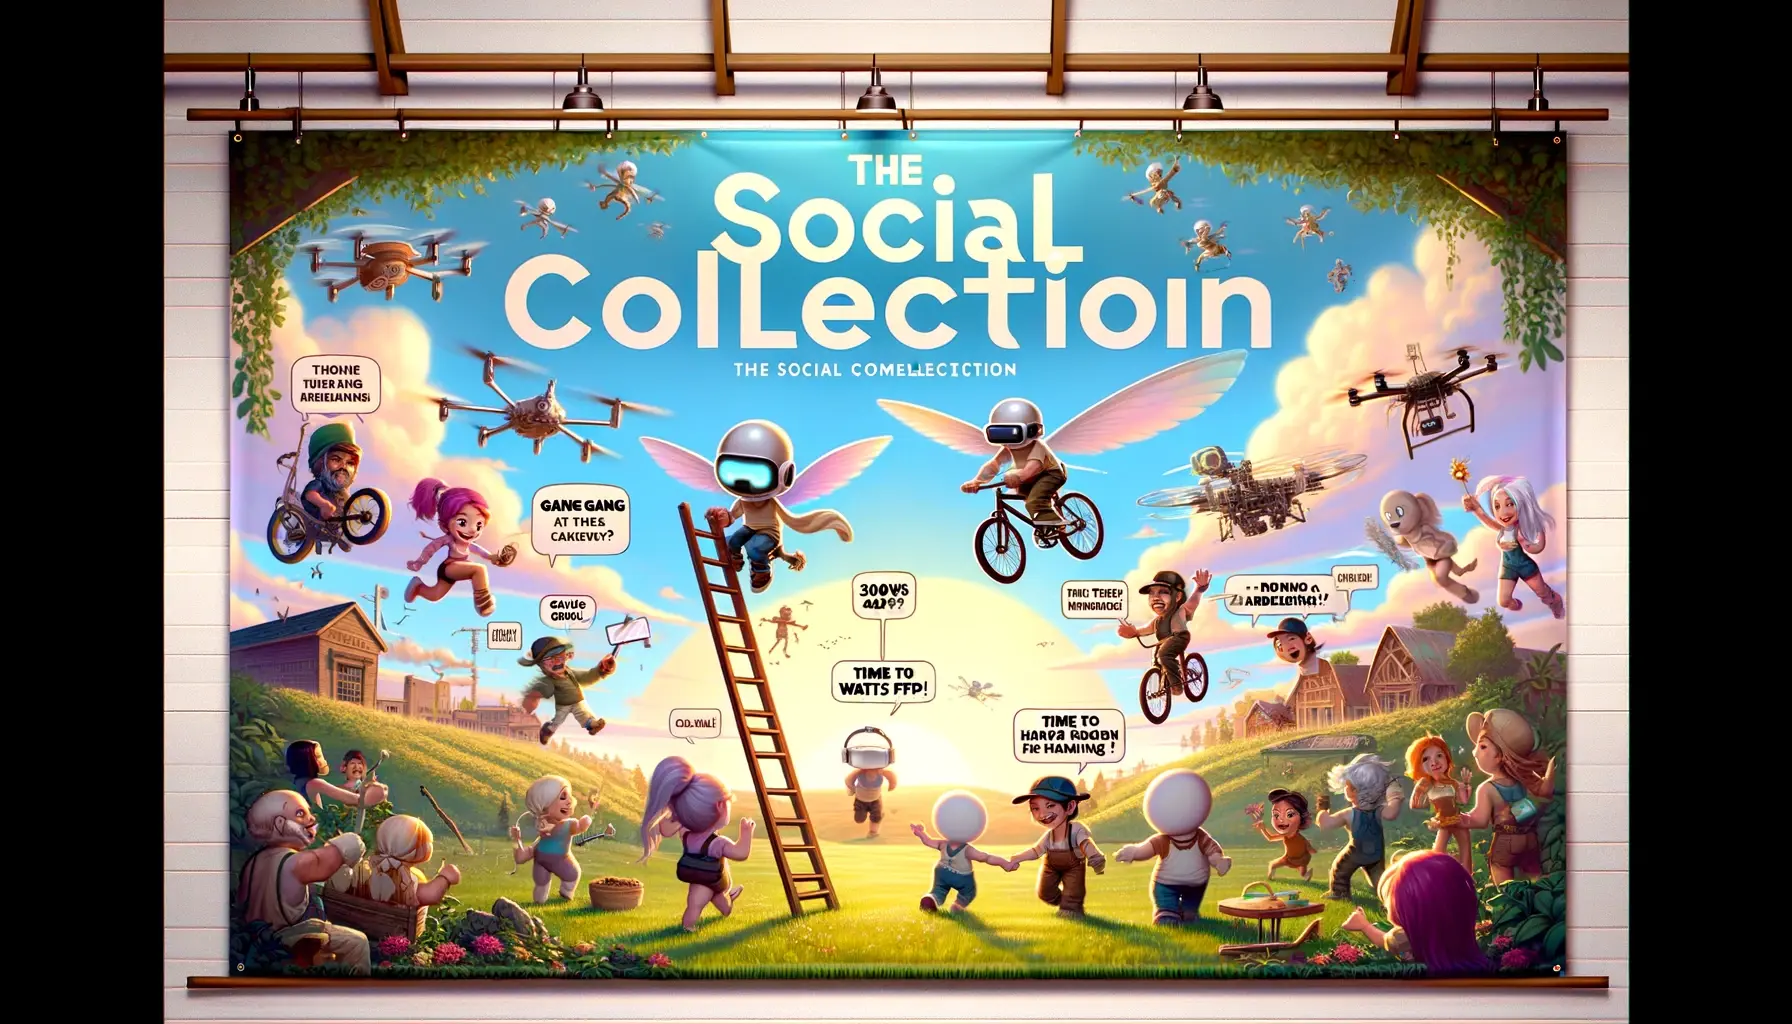 The Social Collection